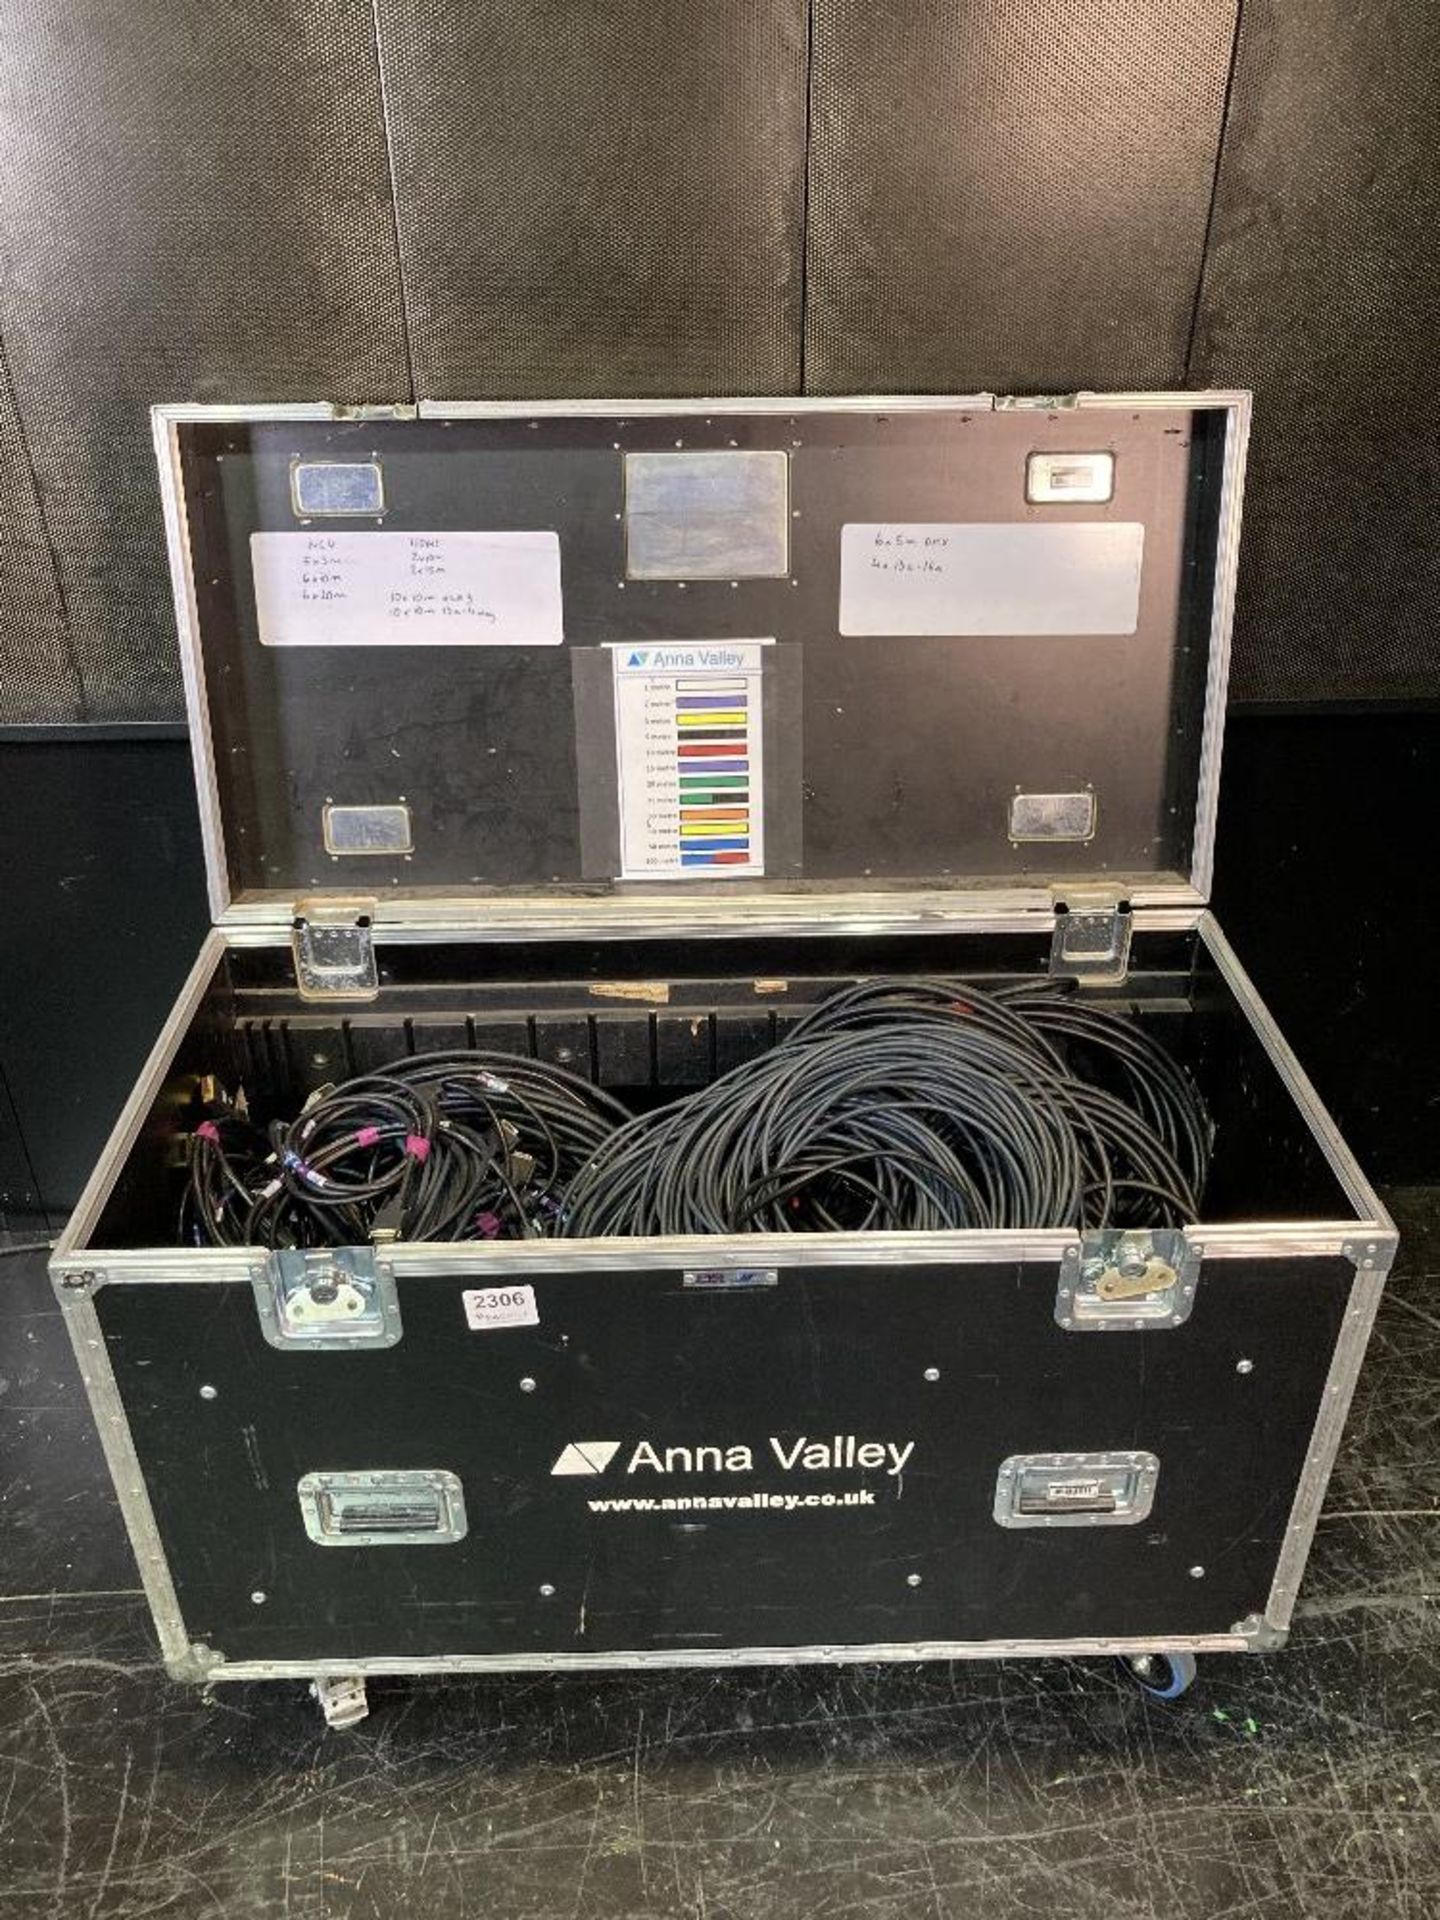 Quantity of Display Cable - Flight Case NOT INCLUDED